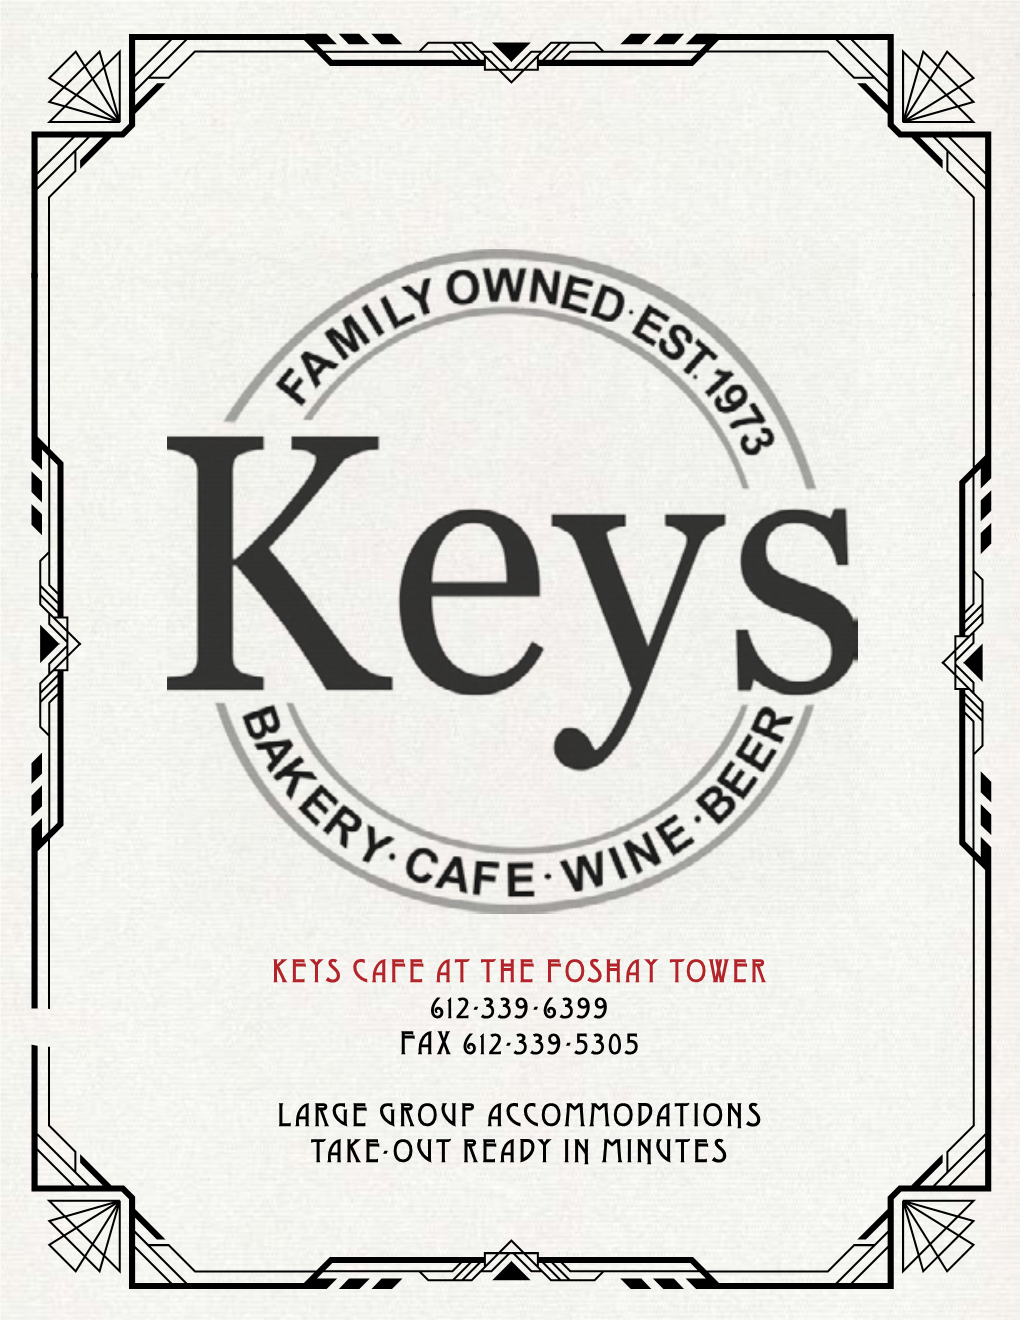 Keys Cafe at the Foshay Tower 612-339-6399 Fax 612-339-5305